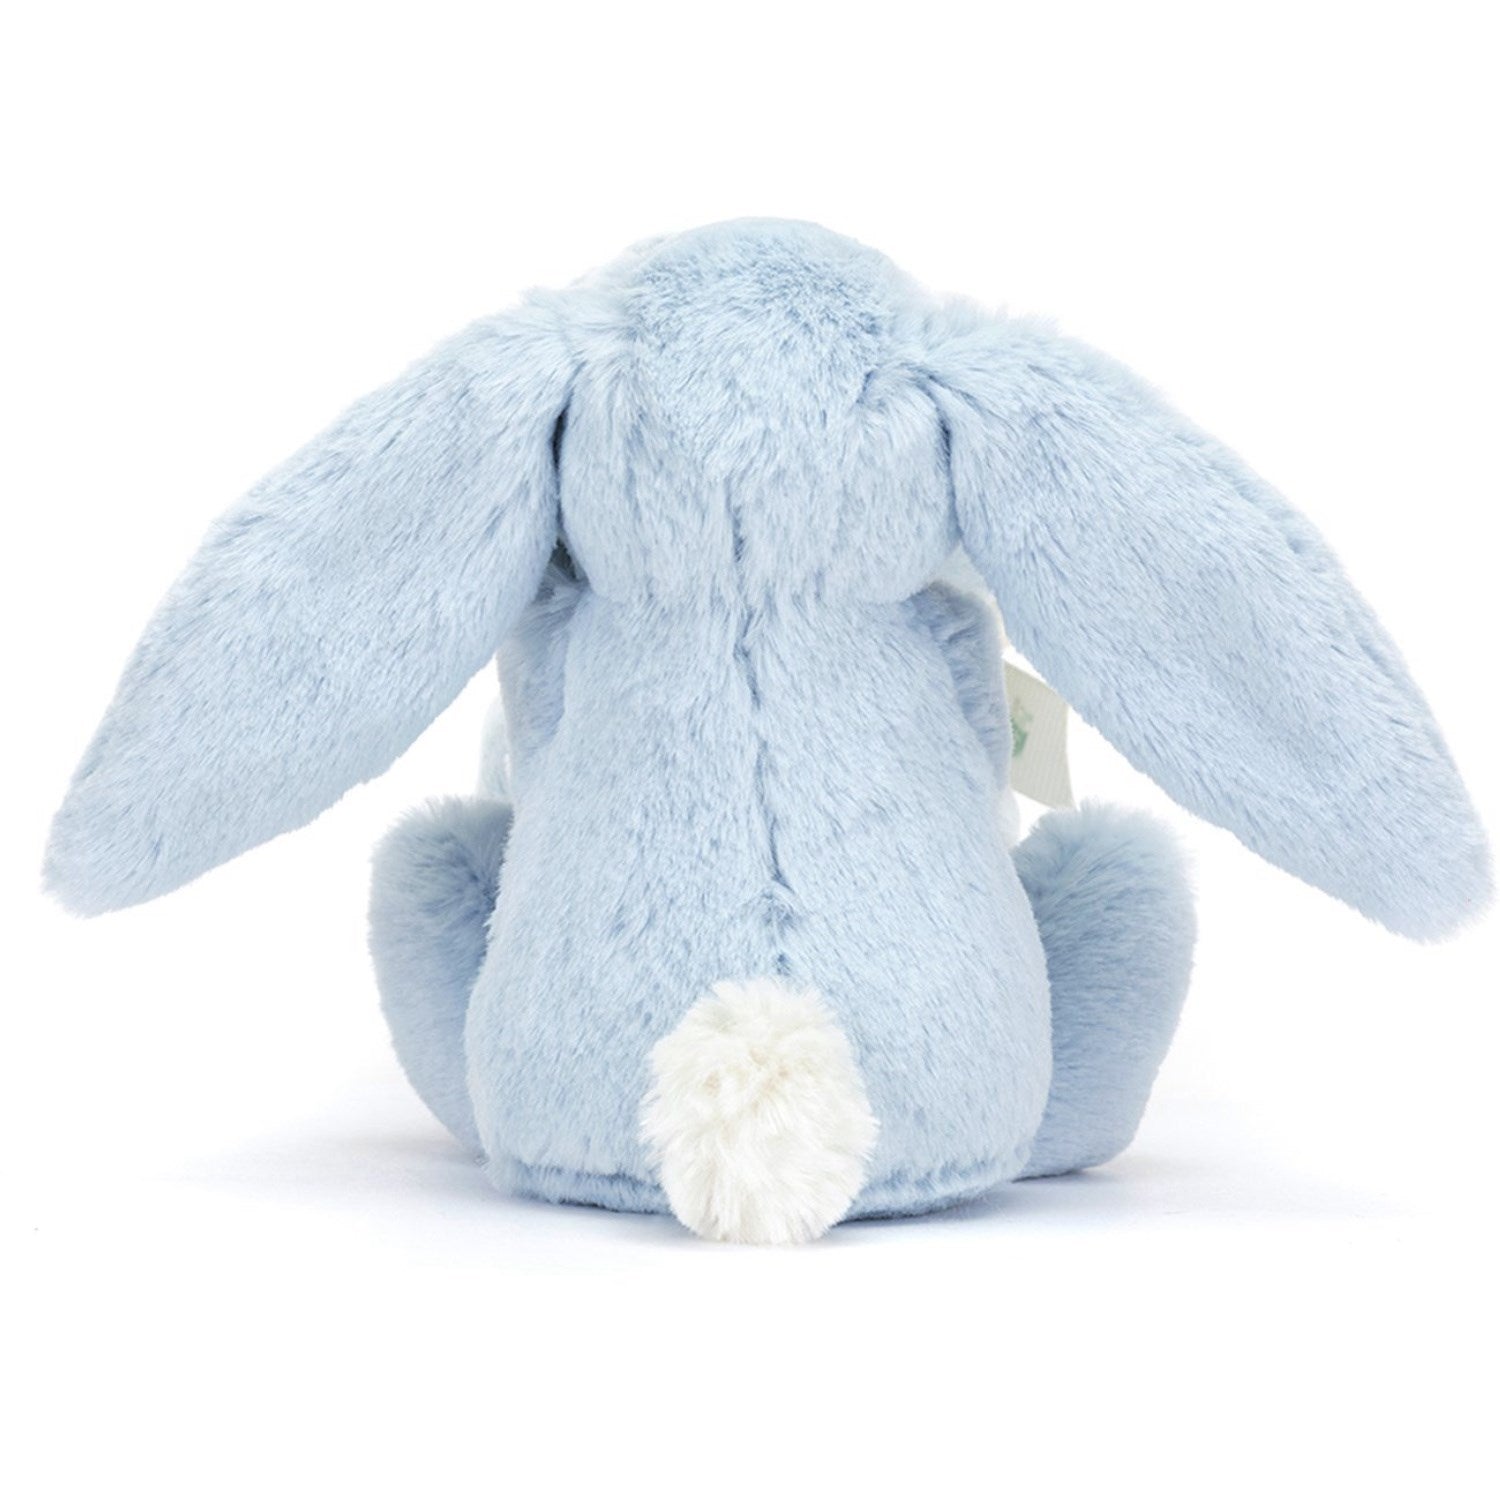   Bashful Blue Bunny Soother 6